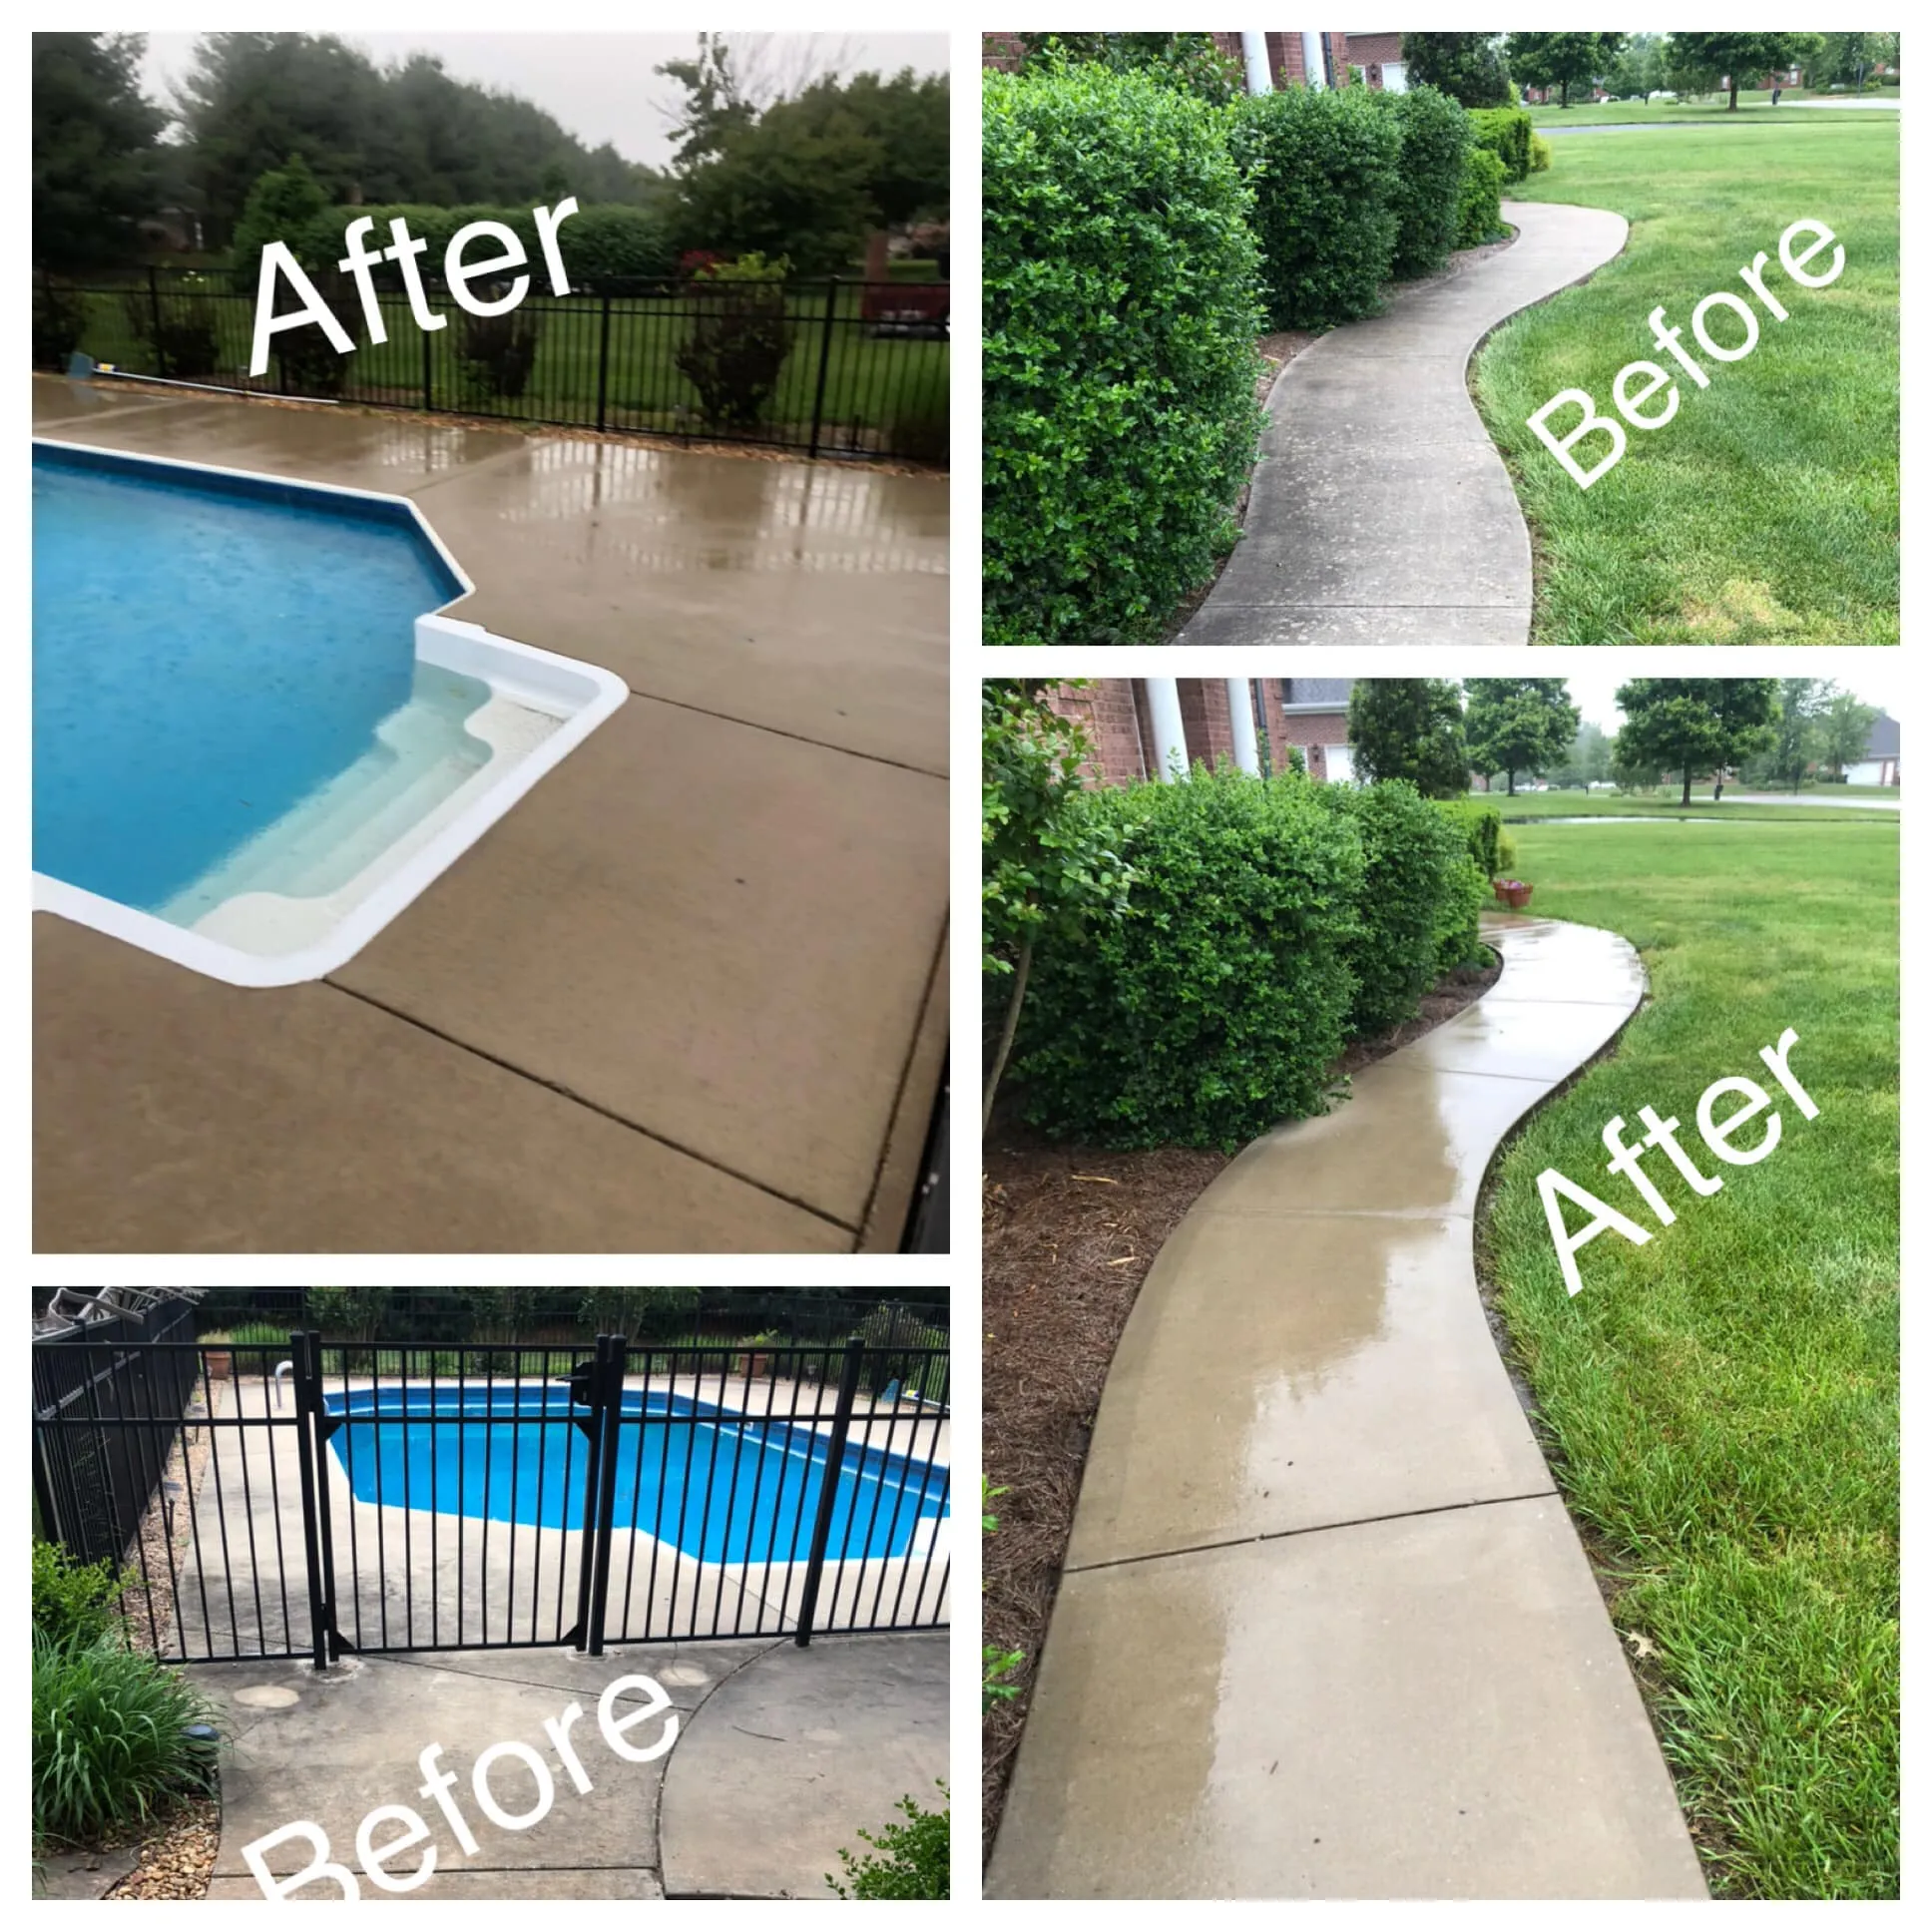 Concrete Sealing & Fence Staining for Cardwell's Contracting in Bowling Green, KY